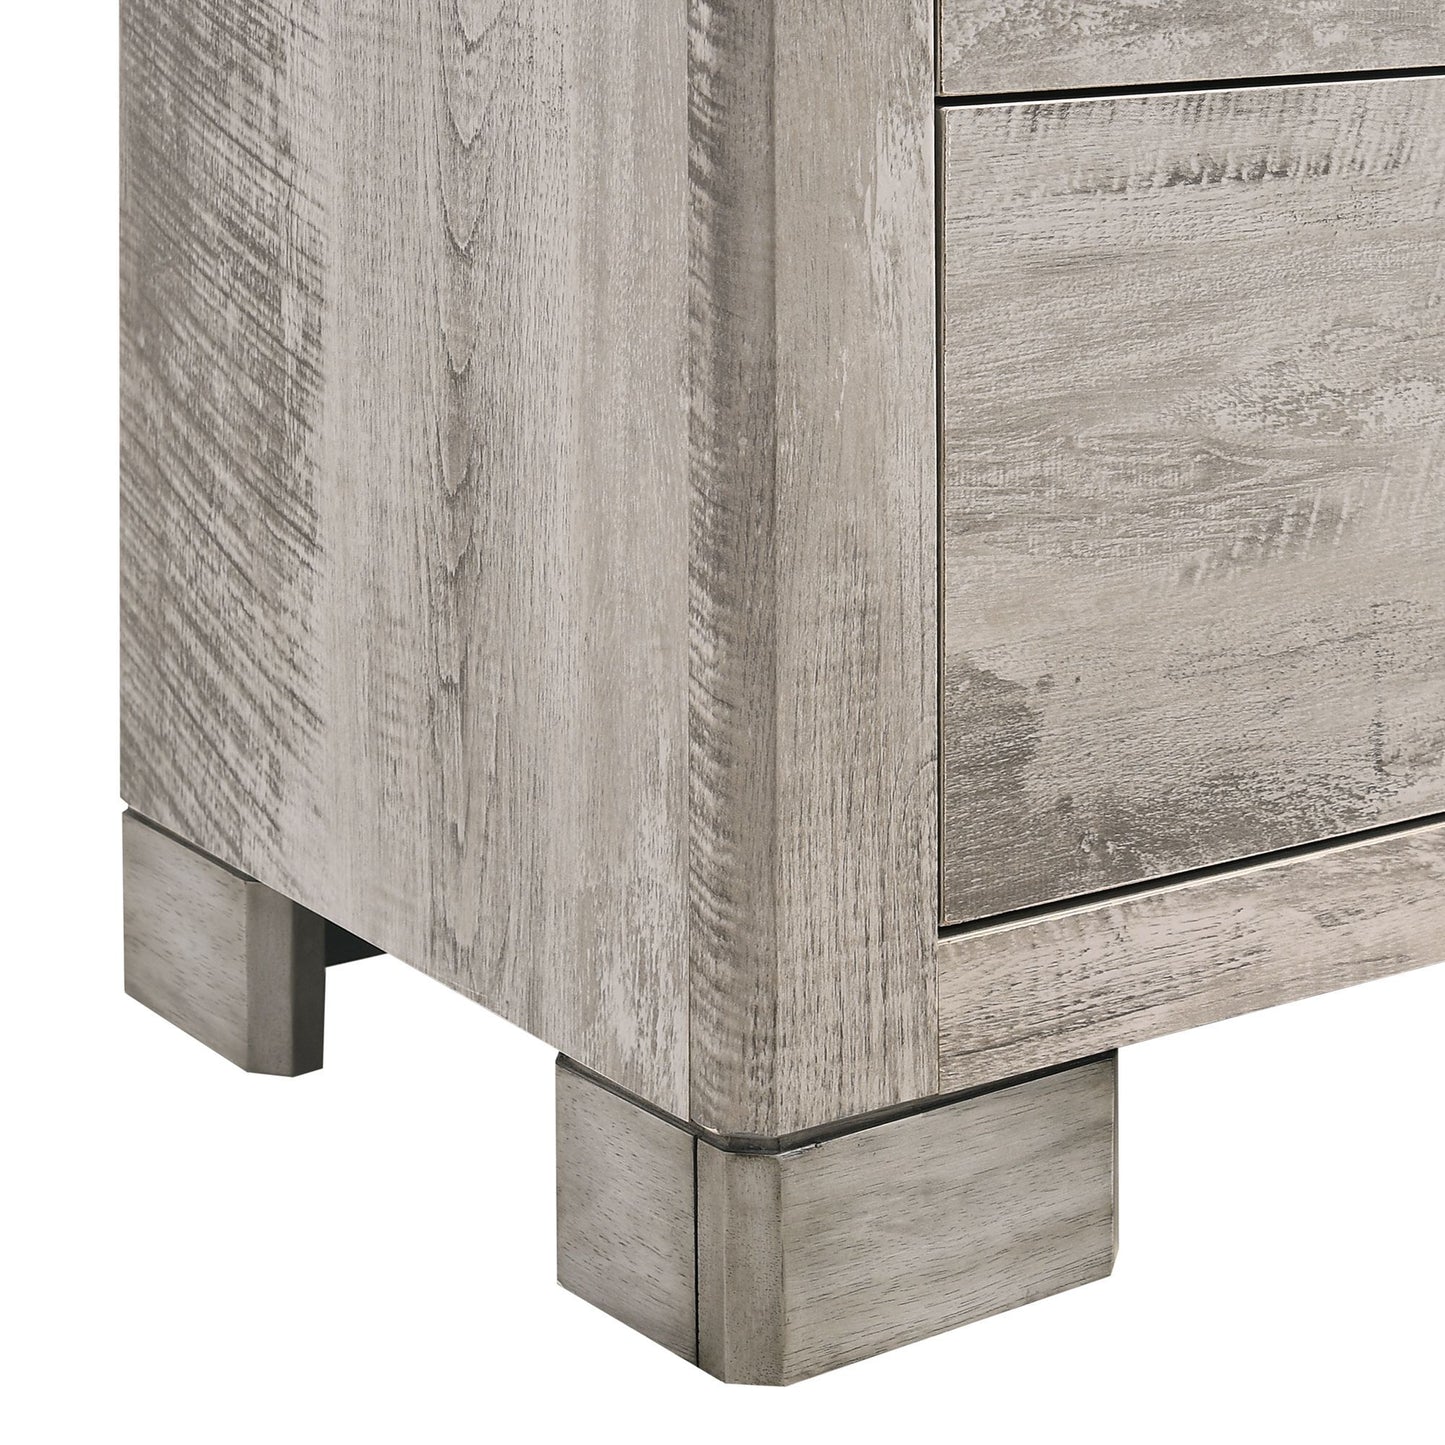 Millers Cove - 6-Drawer Dresser - Distressed Gray